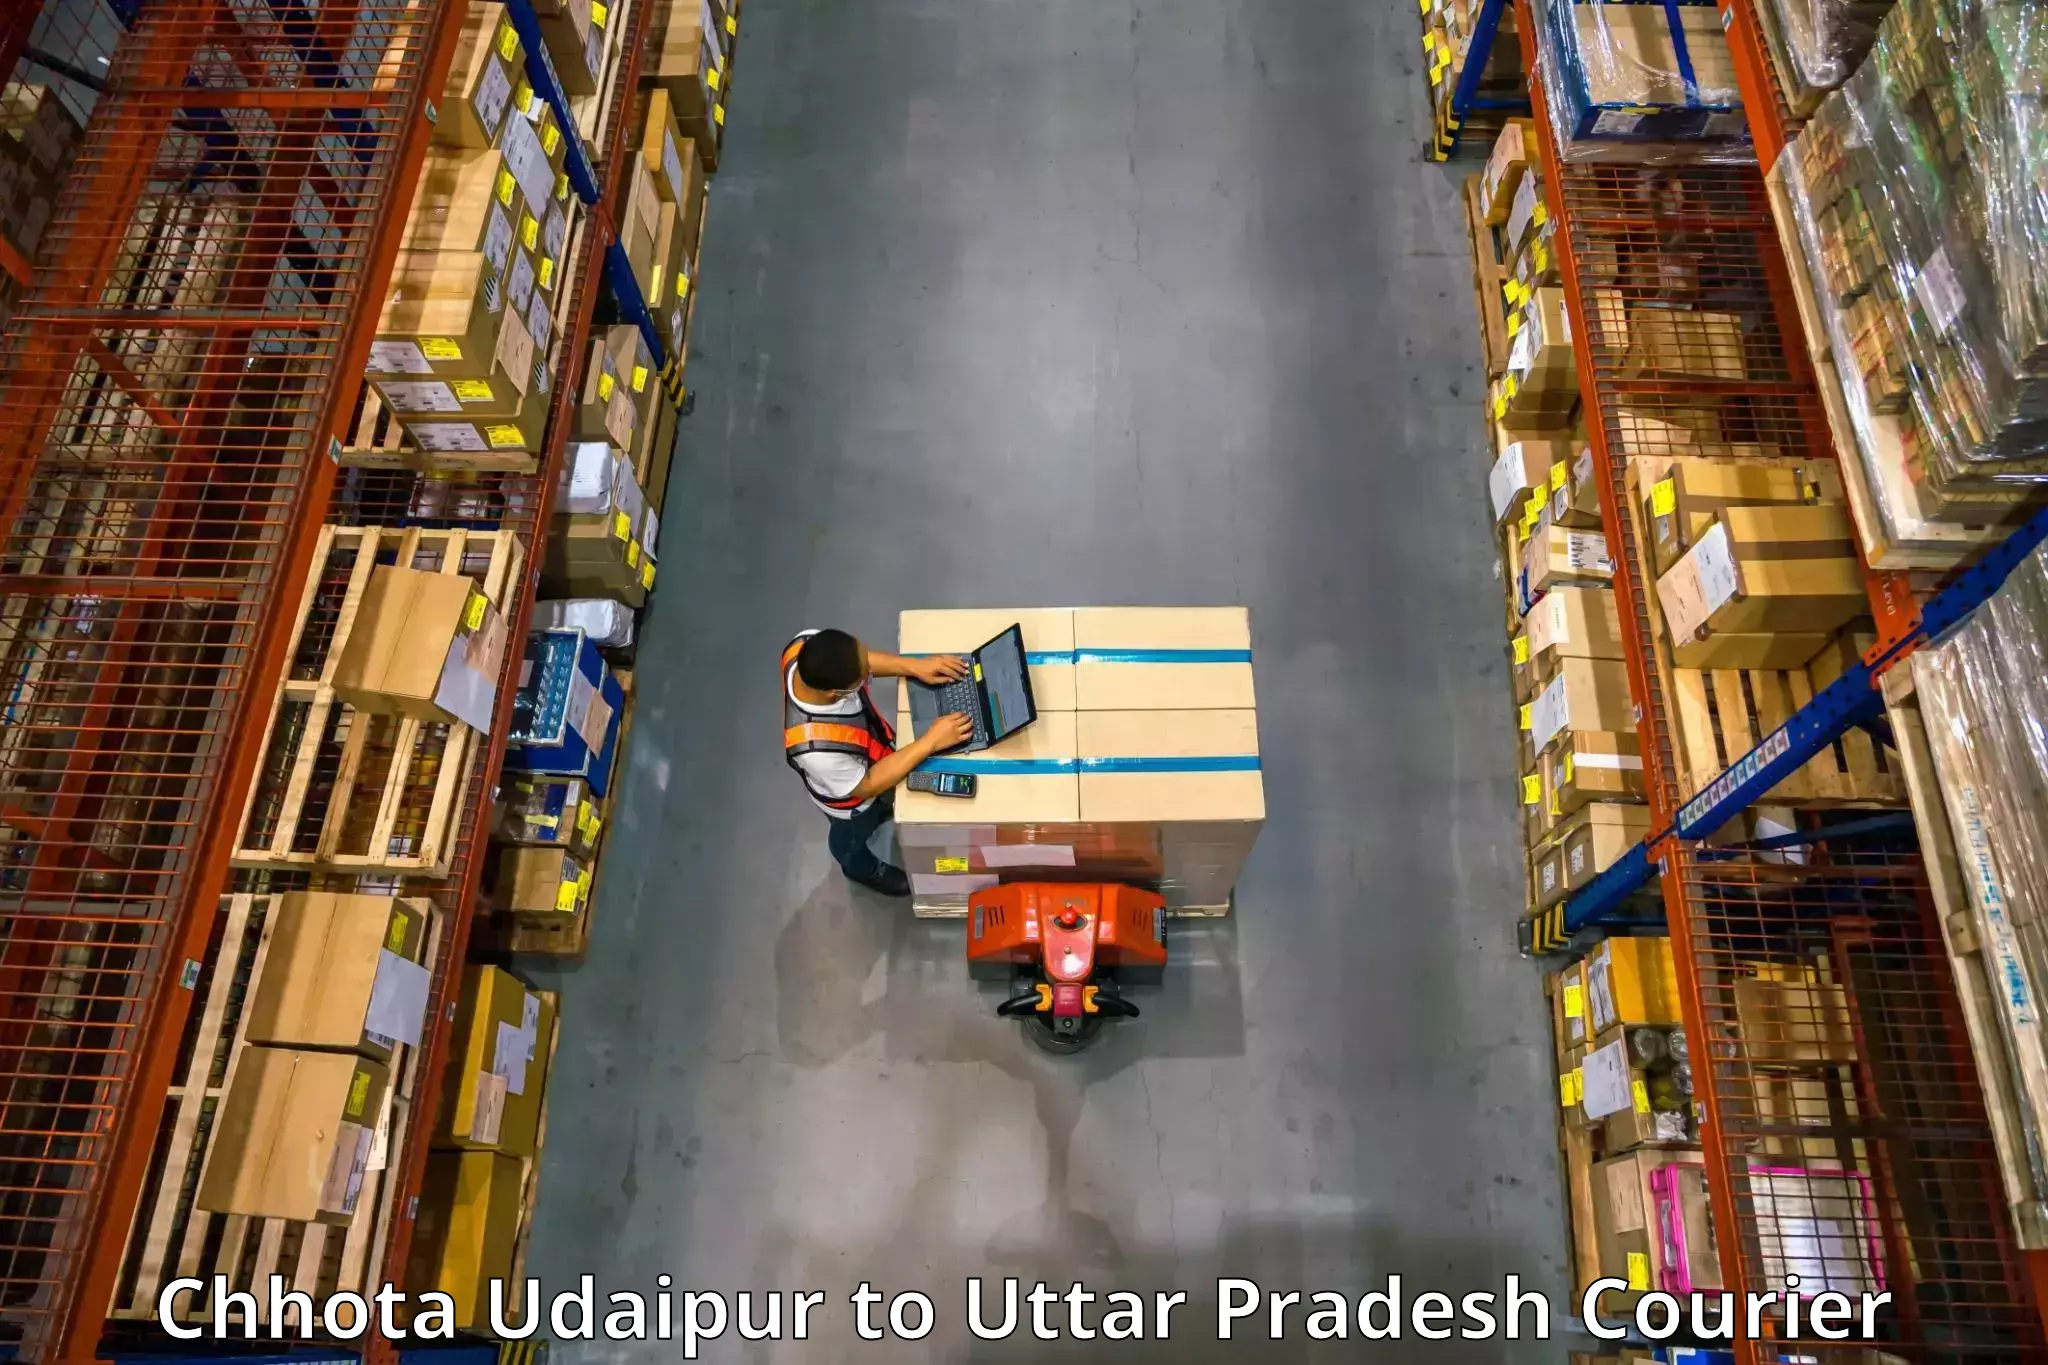 Furniture moving and handling Chhota Udaipur to Agra